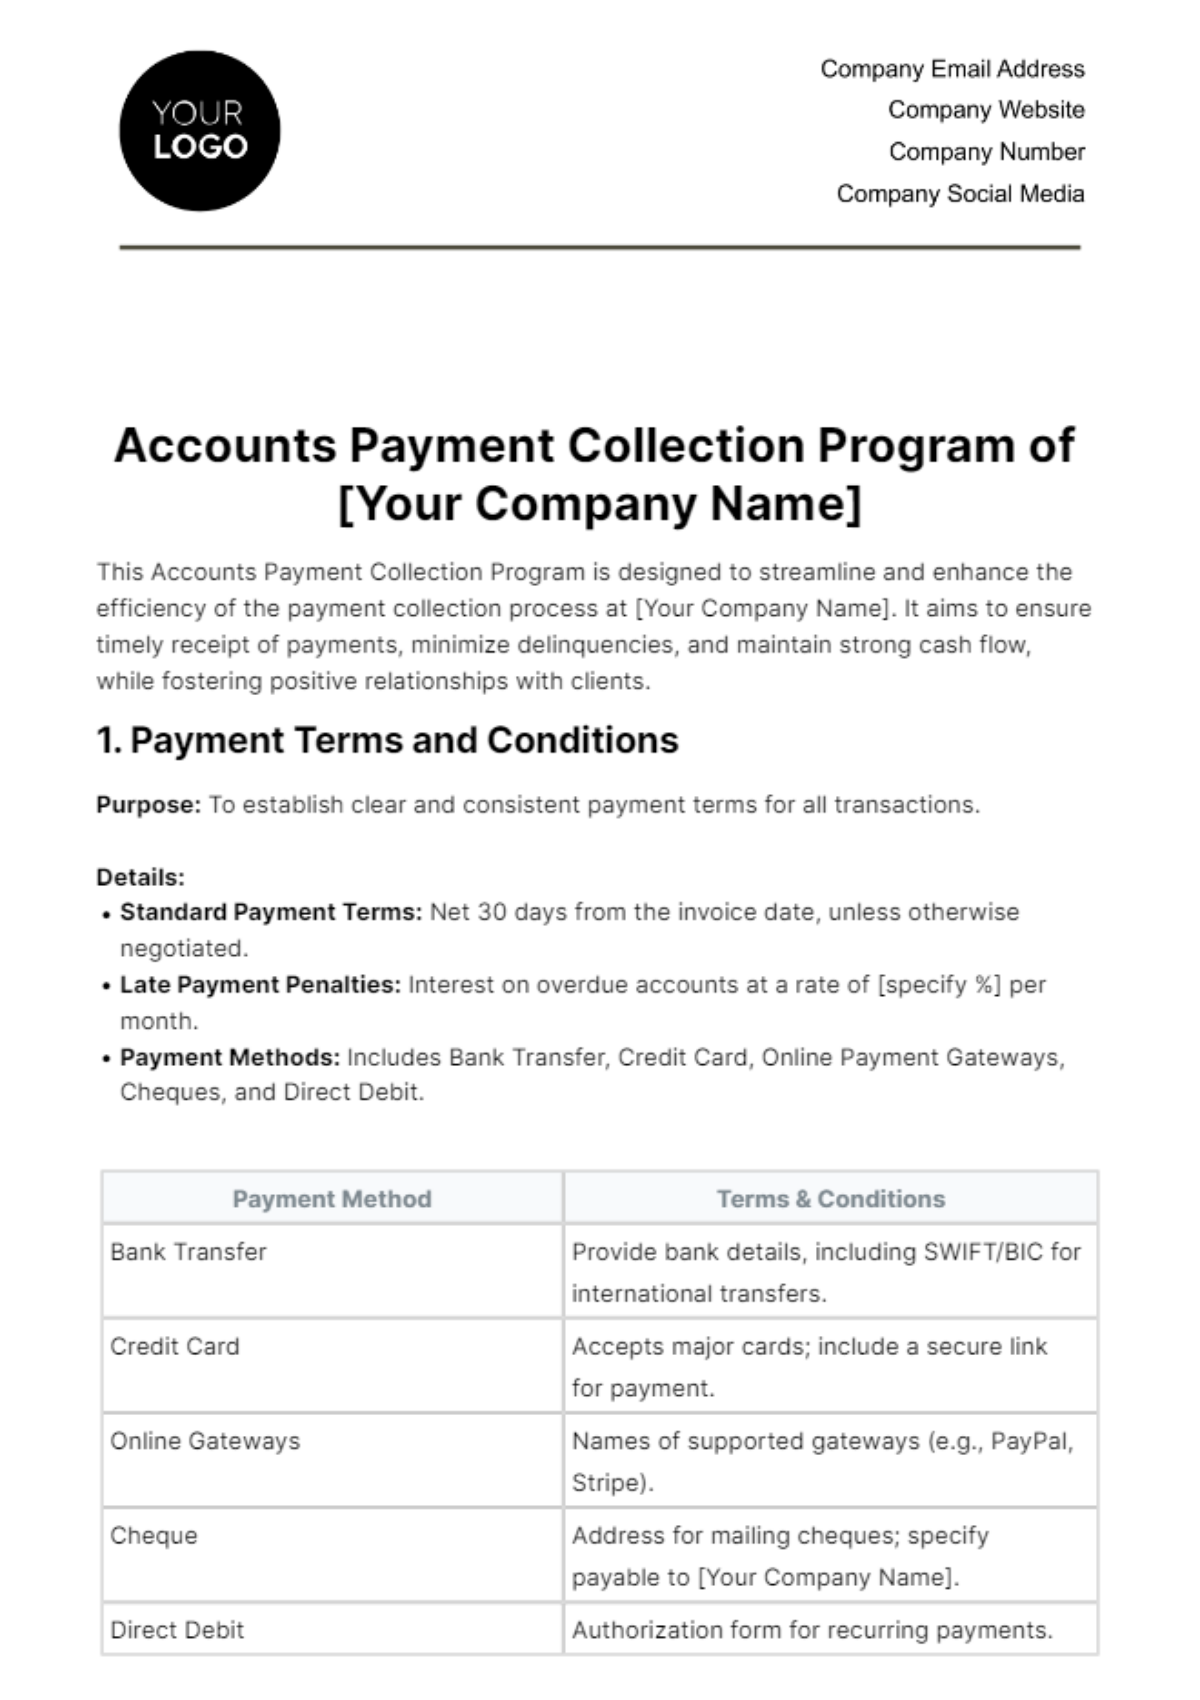 Accounts Payment Collection Program Template